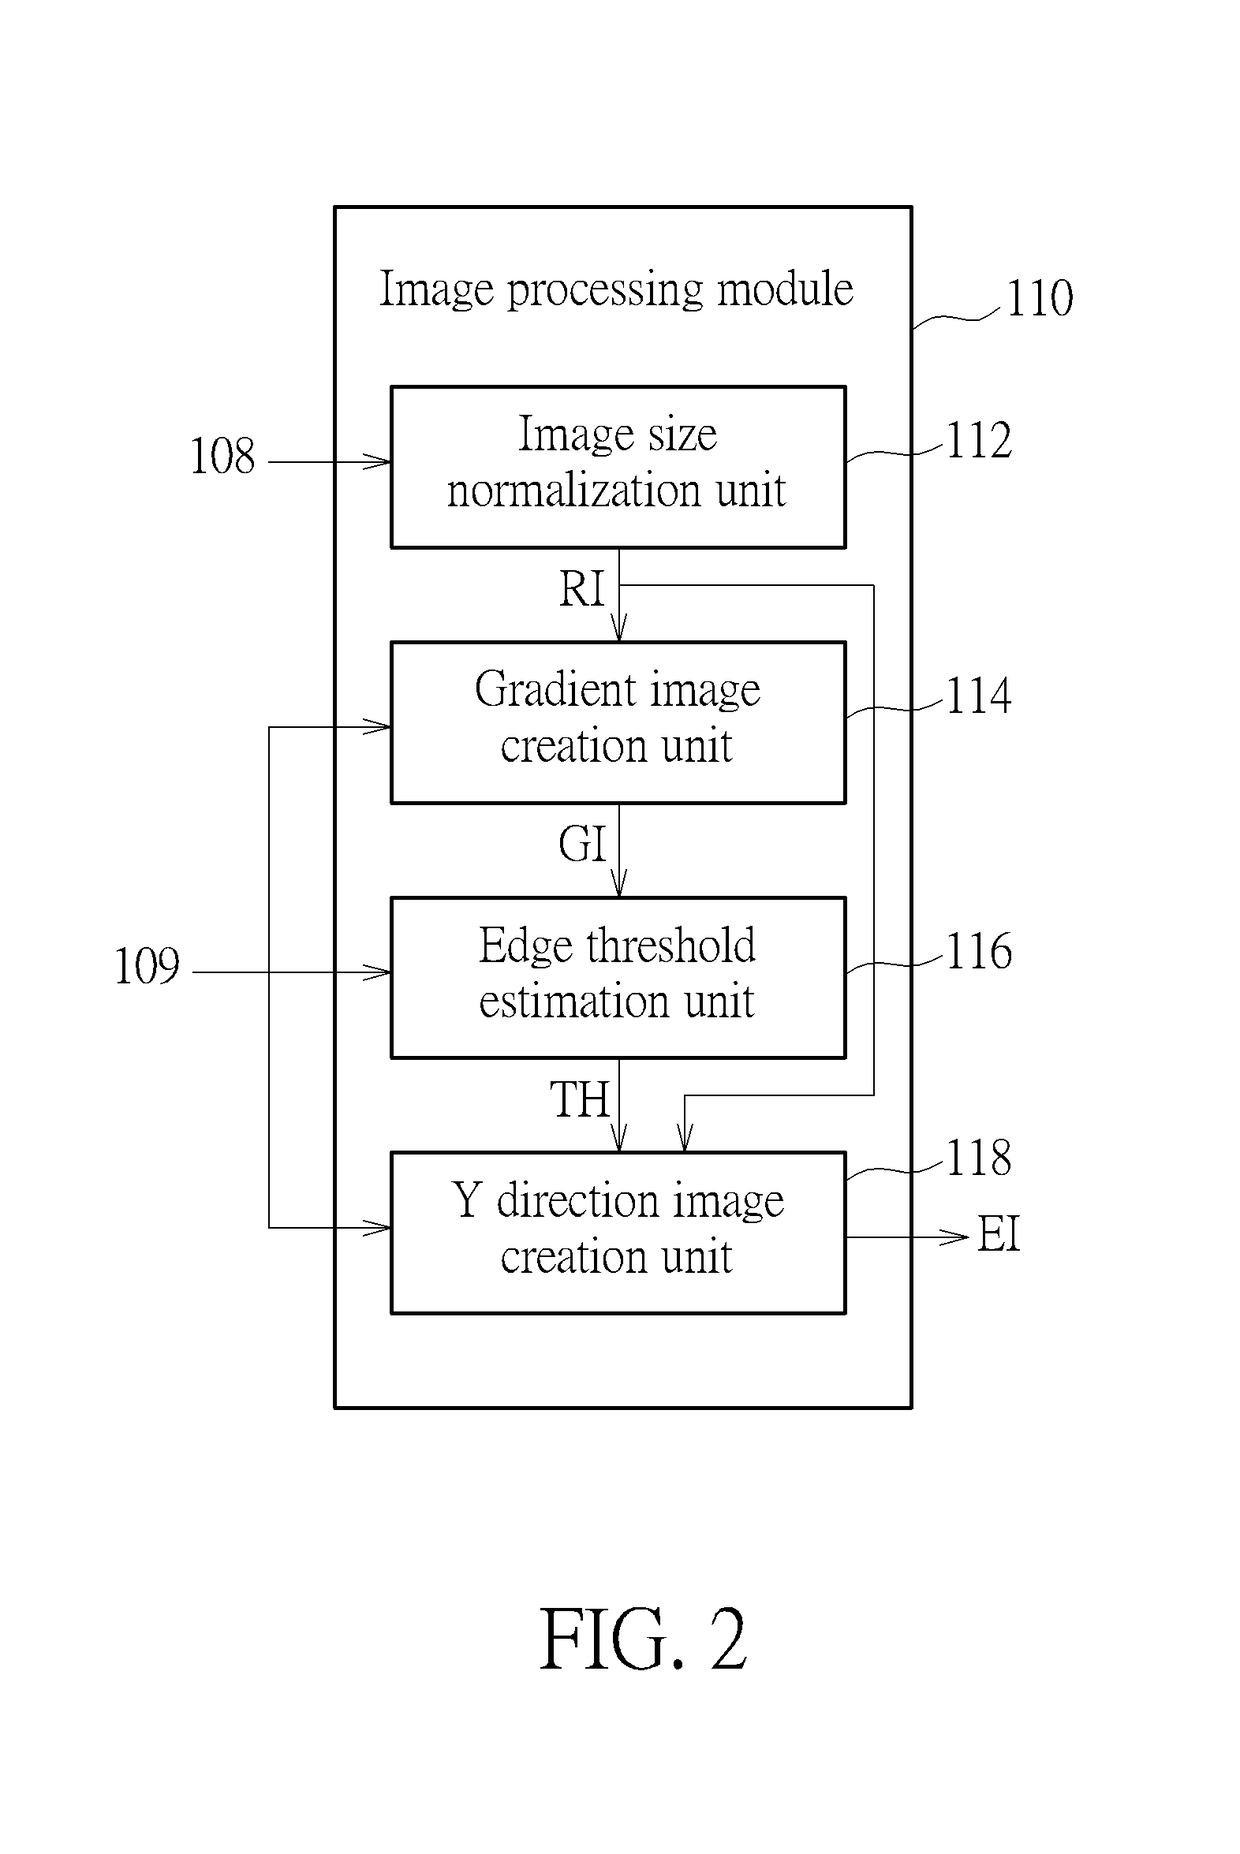 Method and apparatus for performing registration plate detection with aid of edge-based sliding concentric windows